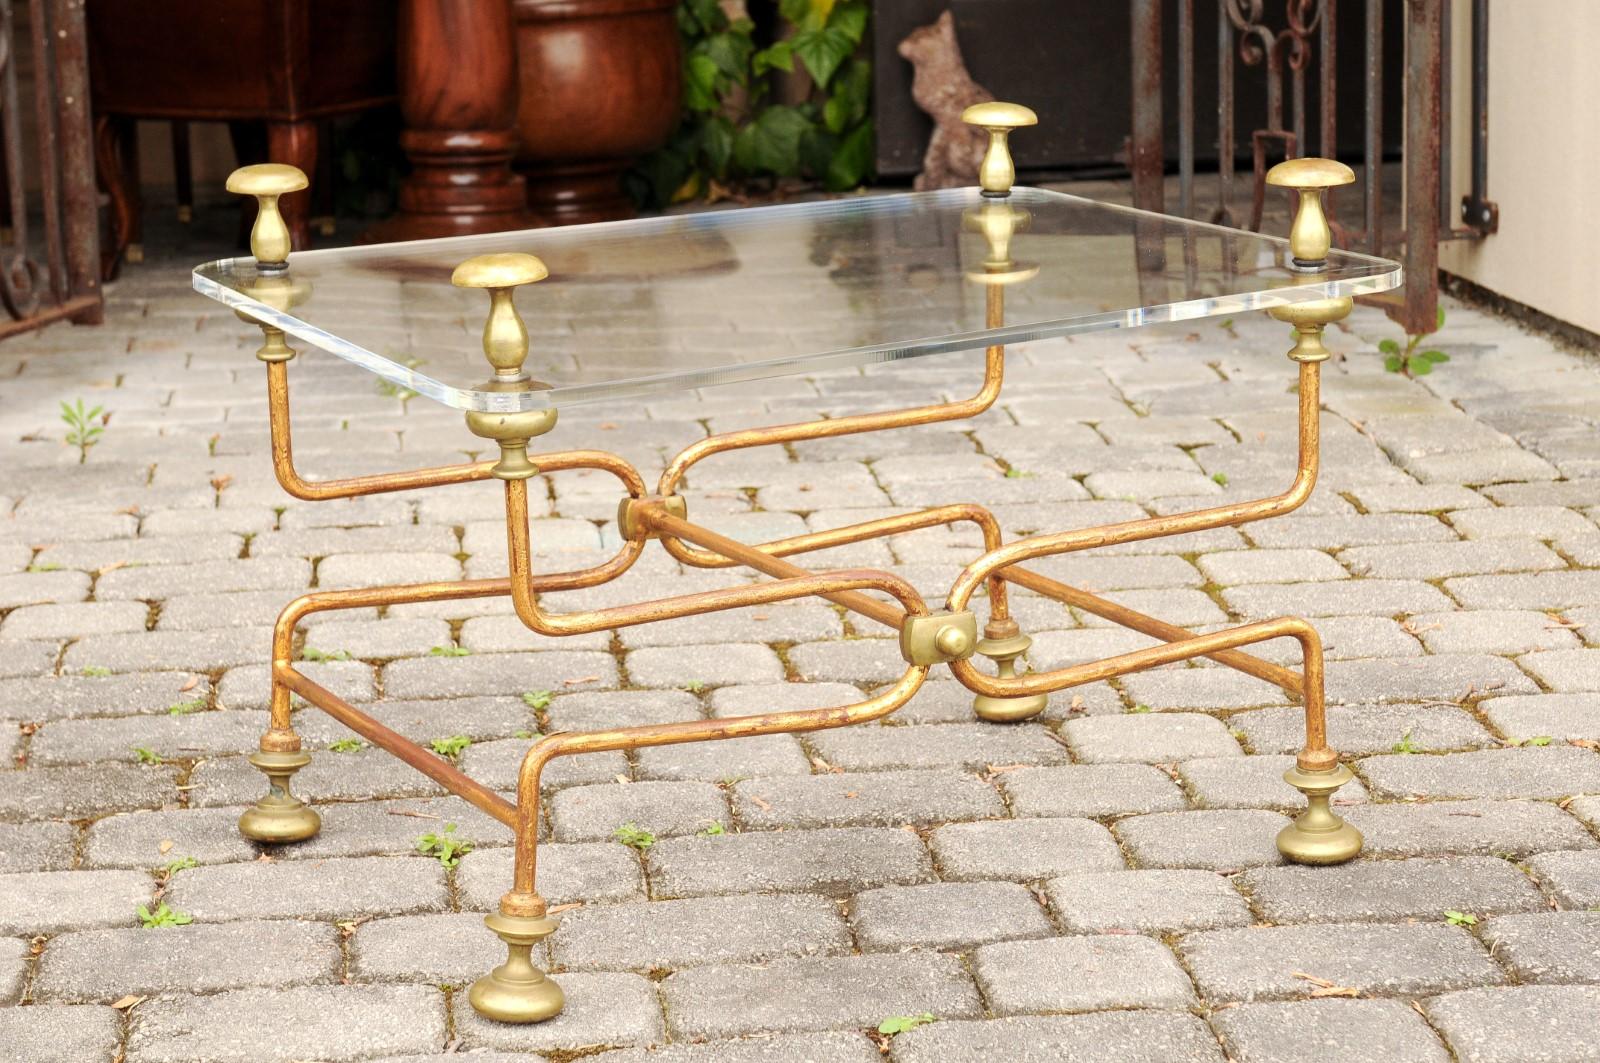 An Italian vintage brass cocktail table from the mid-20th century, with Lucite top. Born in Italy during the midcentury period, this cocktail table features a rectangular Lucite top, accented with eye-catching finials in its corners. The table is